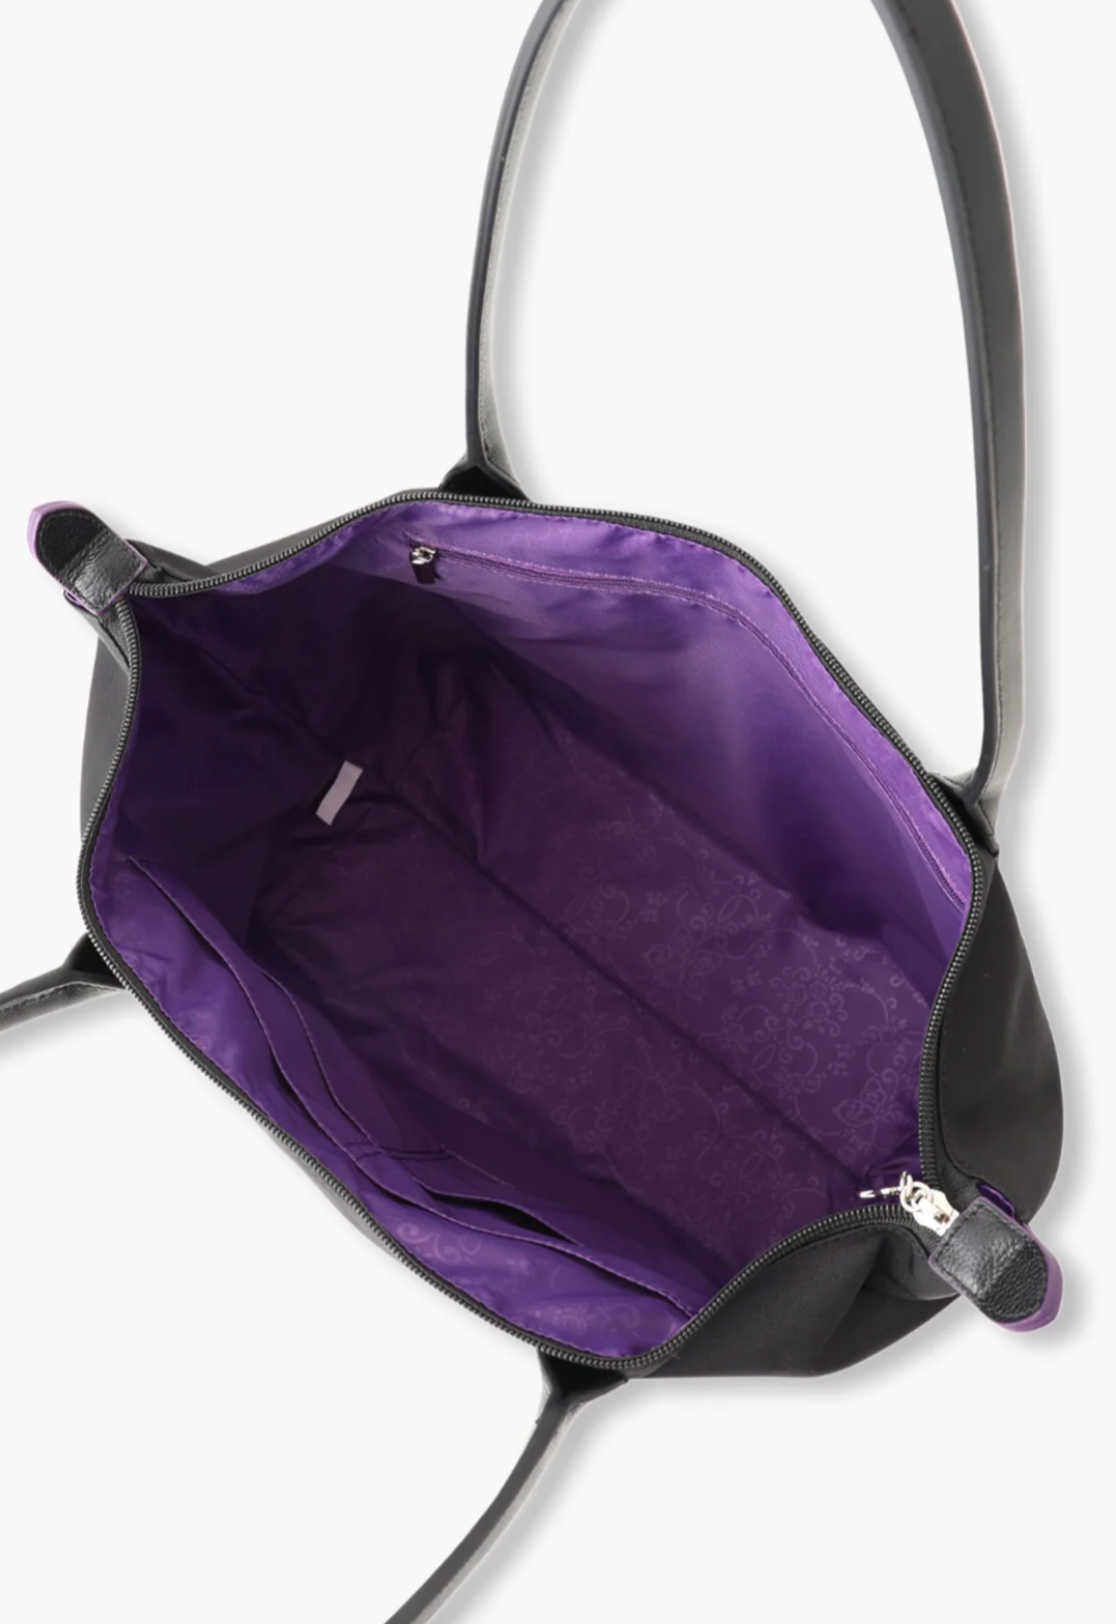 Voyage Tote, large purple inside compartment, 2-open pockets with 2 slots, 1 zipper compartment